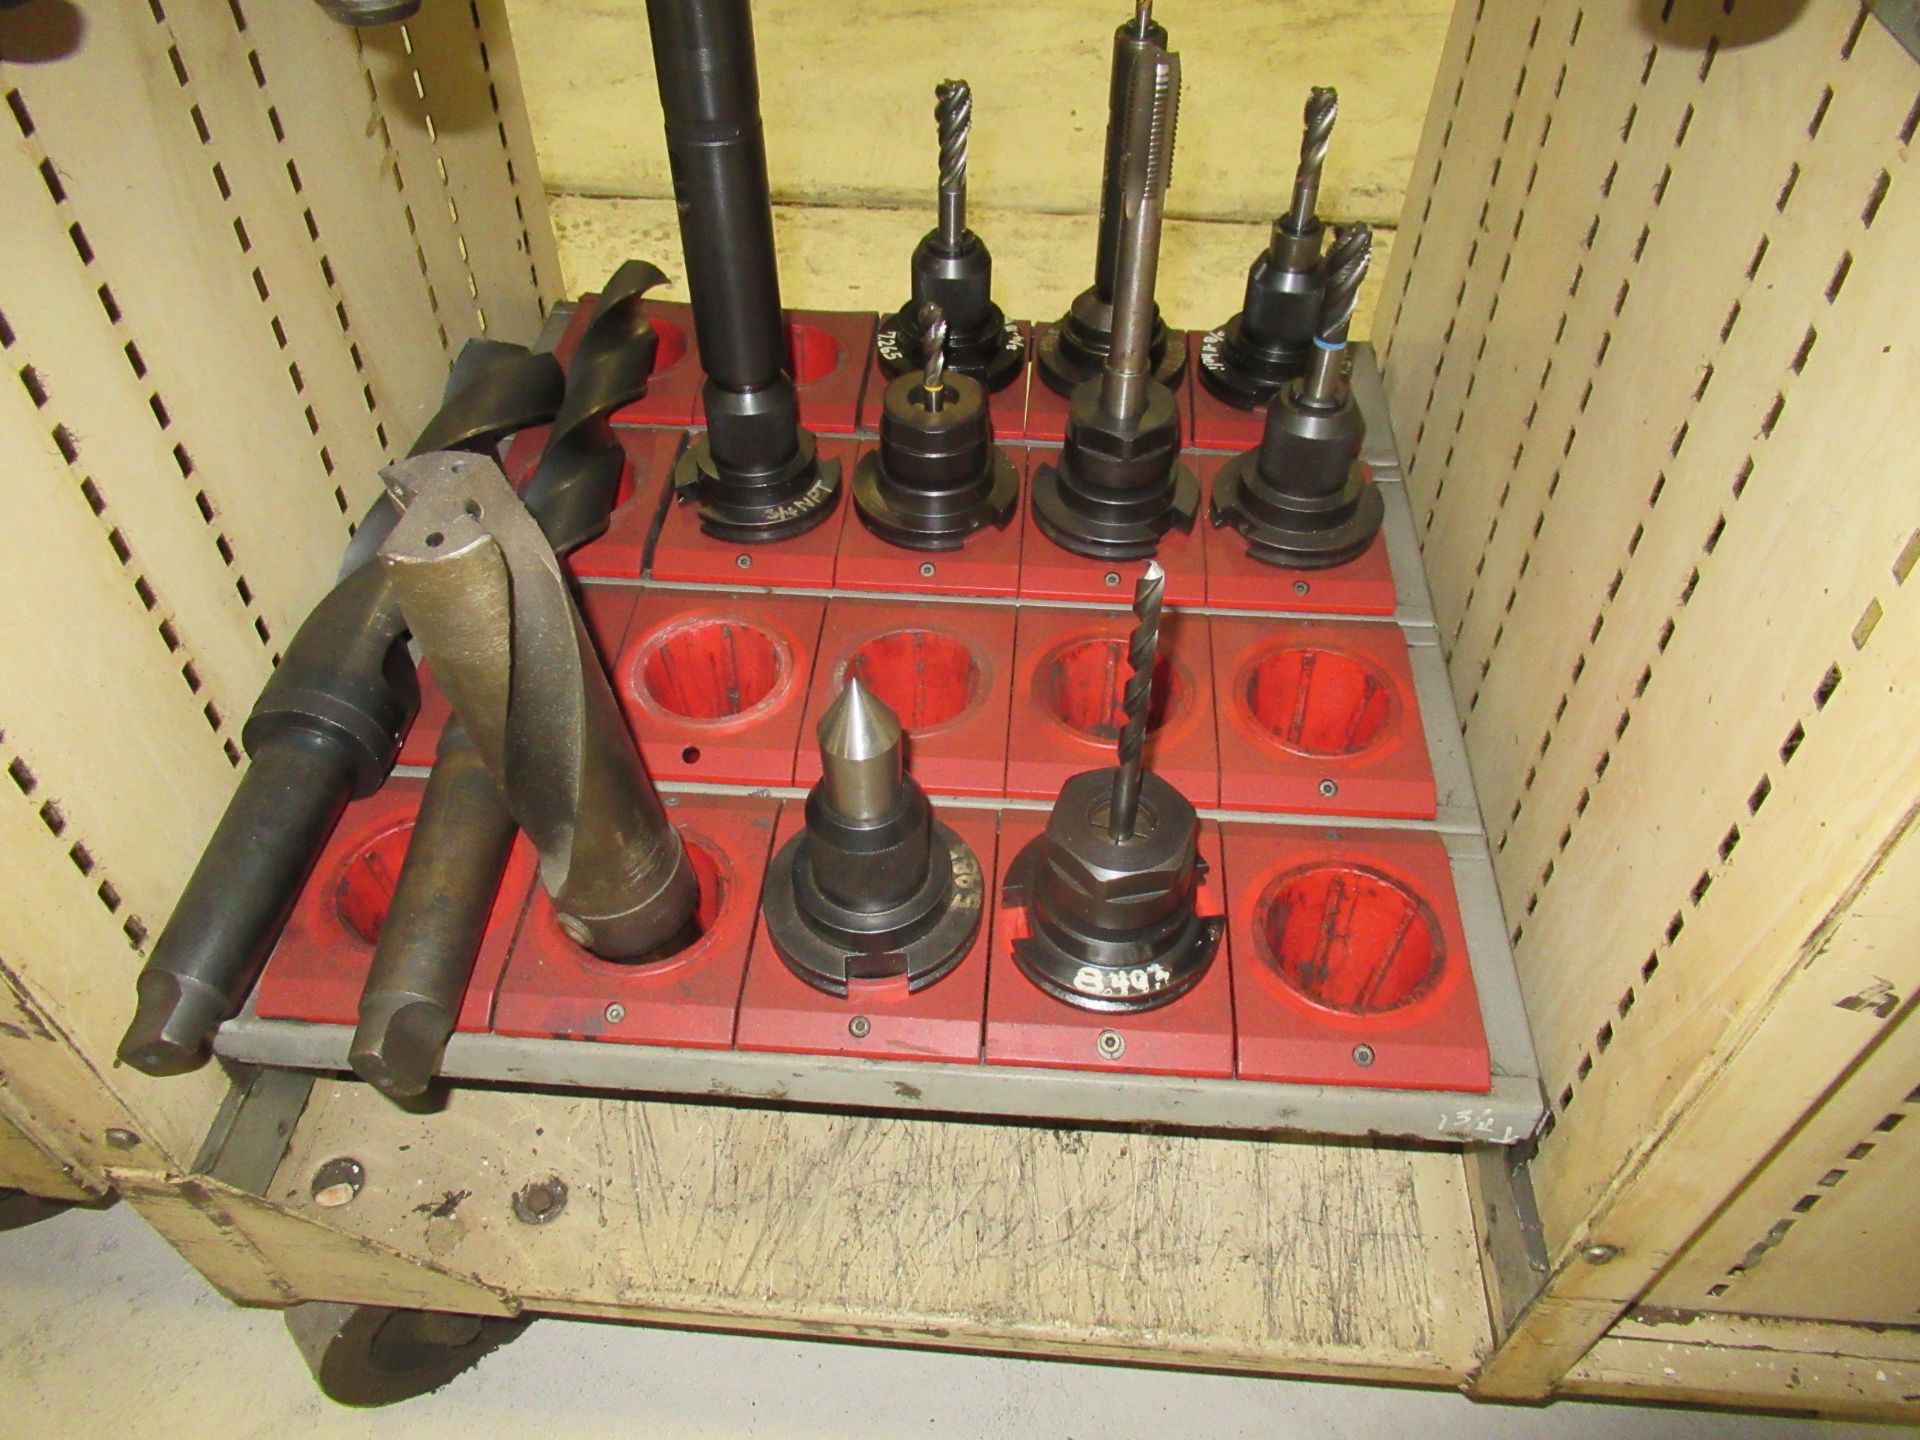 LOT OF #50 TAPER TOOL HOLDERS WITH CARTS - Image 3 of 3